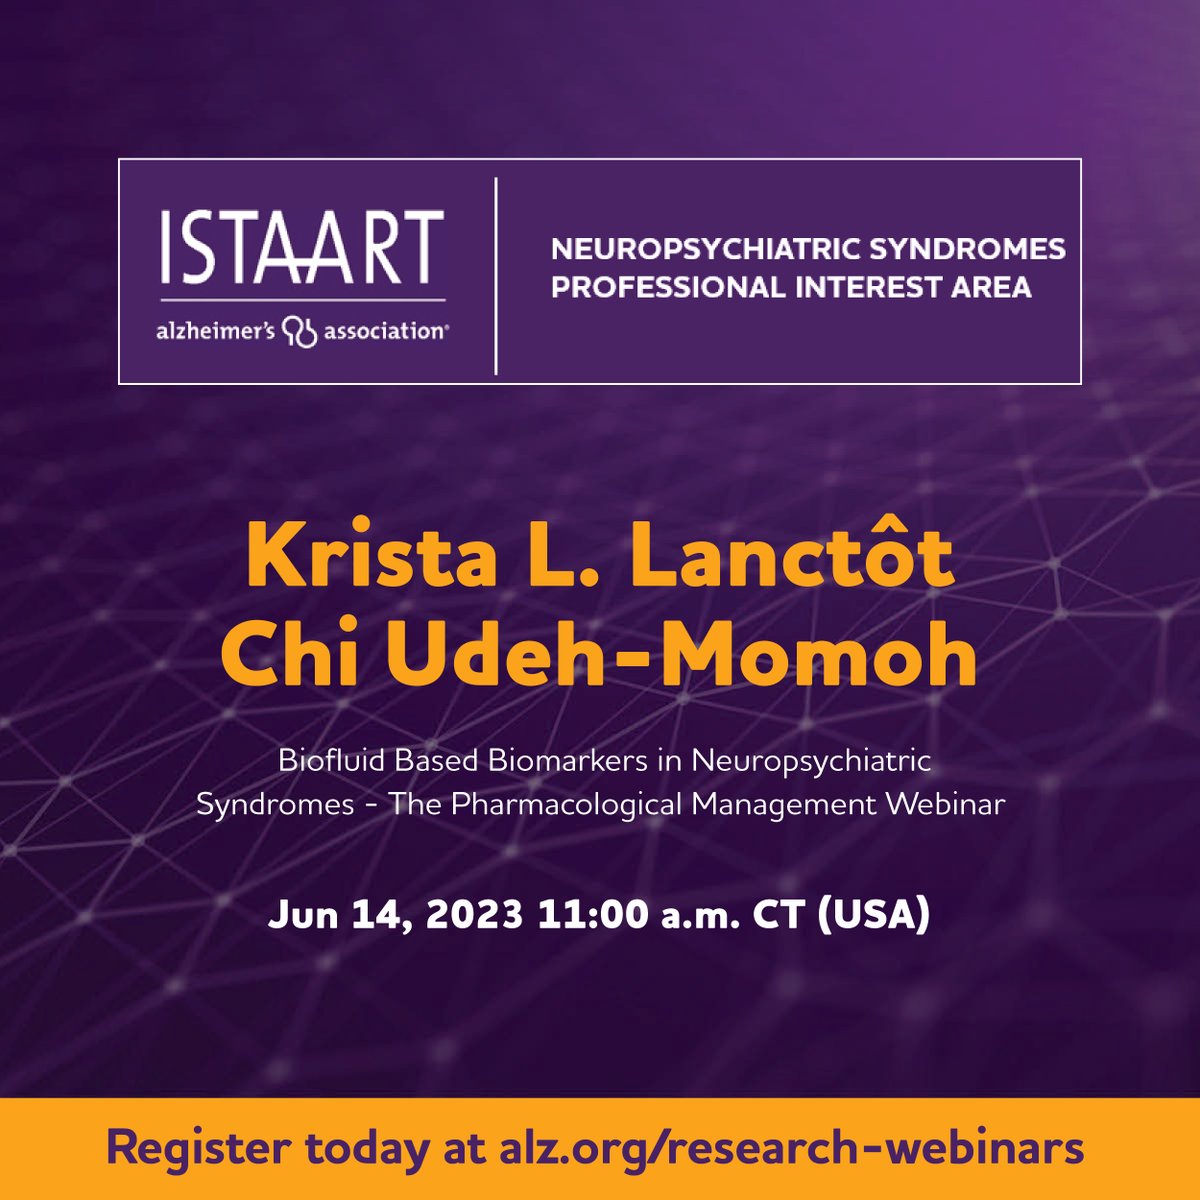 Mark your calendars 🗓️ for our joint webinar between the @NeuroPsychPIA and @FluidMarkersPIA on 6/14/23 at 11AM CT! @KristaLanctot and Chi Udeh-Momoh will be presenting on Biofluid Based Biomarkers in Neuropsychiatric Syndromes. Register at alz.org/research-webin…